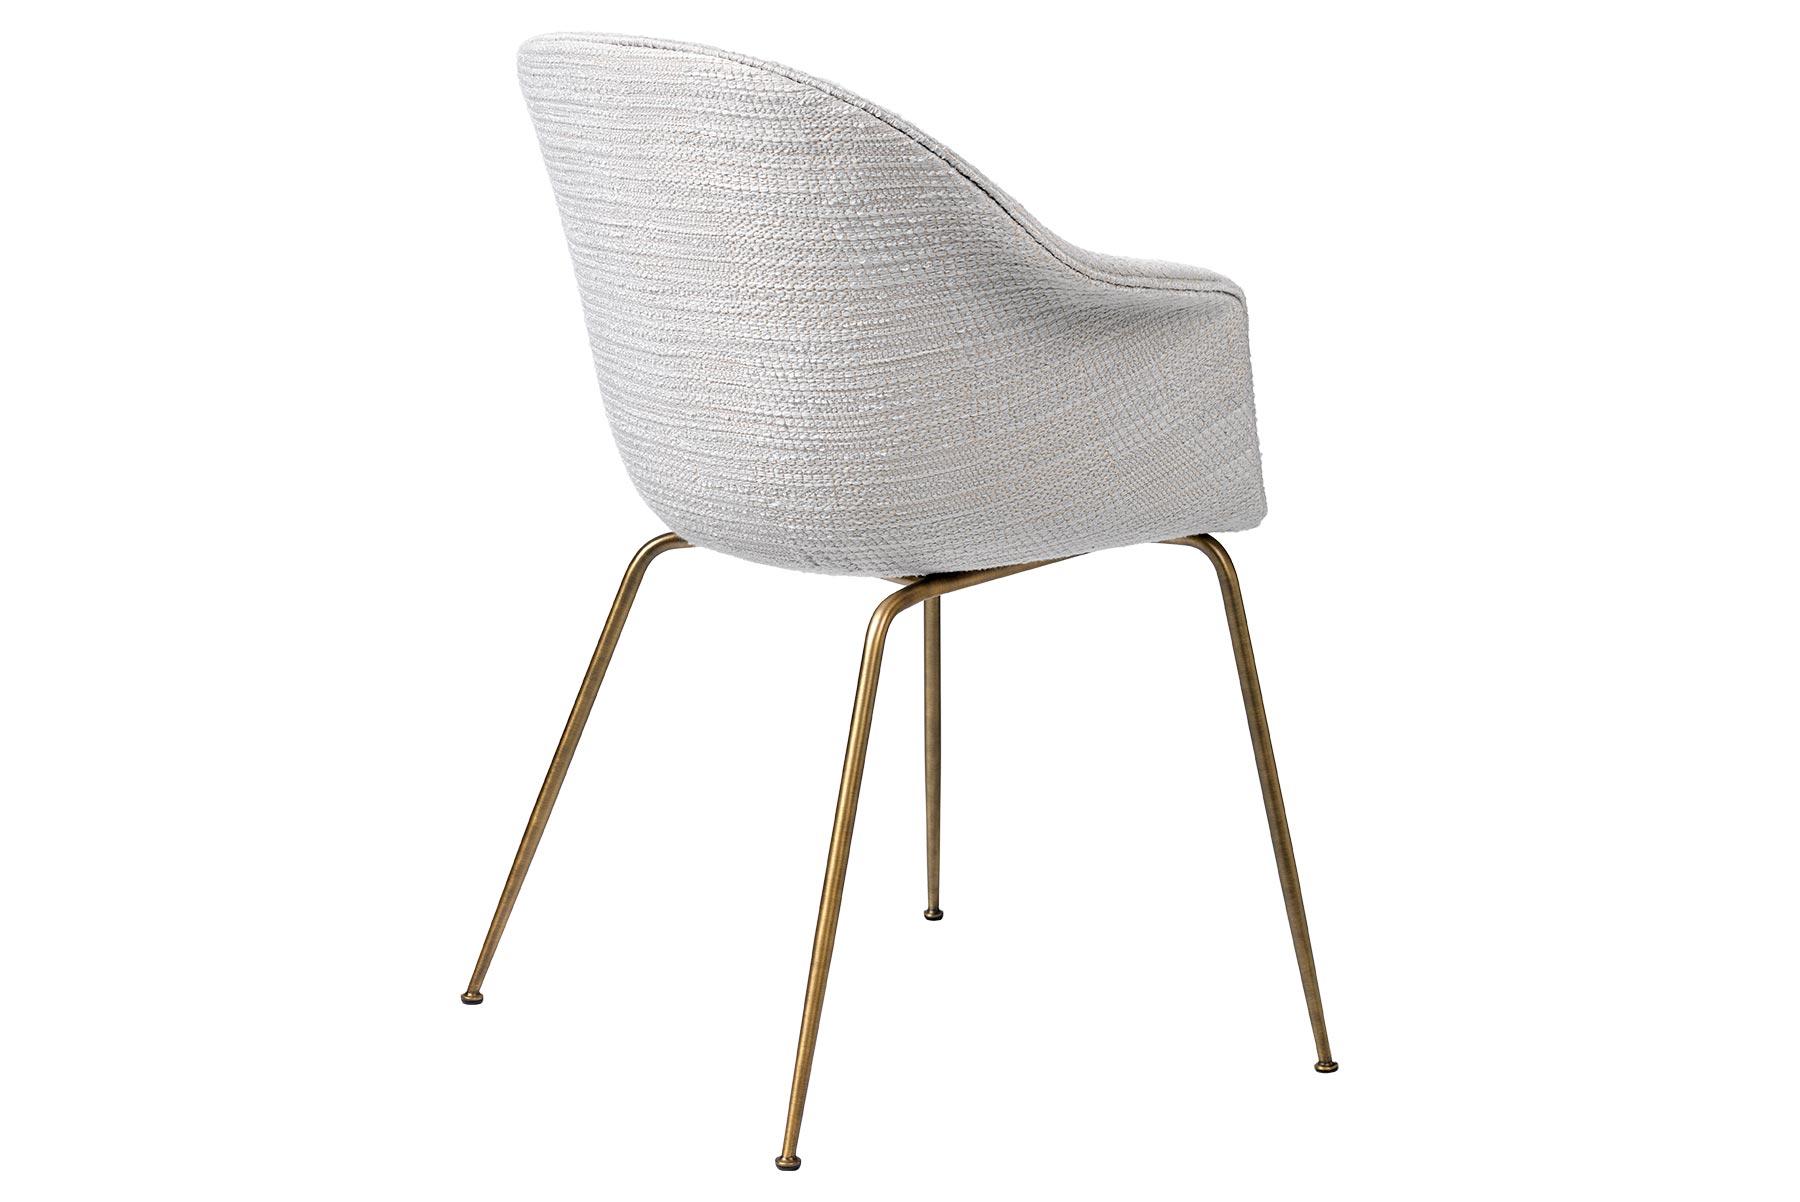 The bat dining chair is created with a Scandinavian approach to crafts, simplicity and functionalism by Danish-Italian design-duo GamFratesi. The embracing shell with armrests equally embodies both aesthetics and comfort while carrying strong